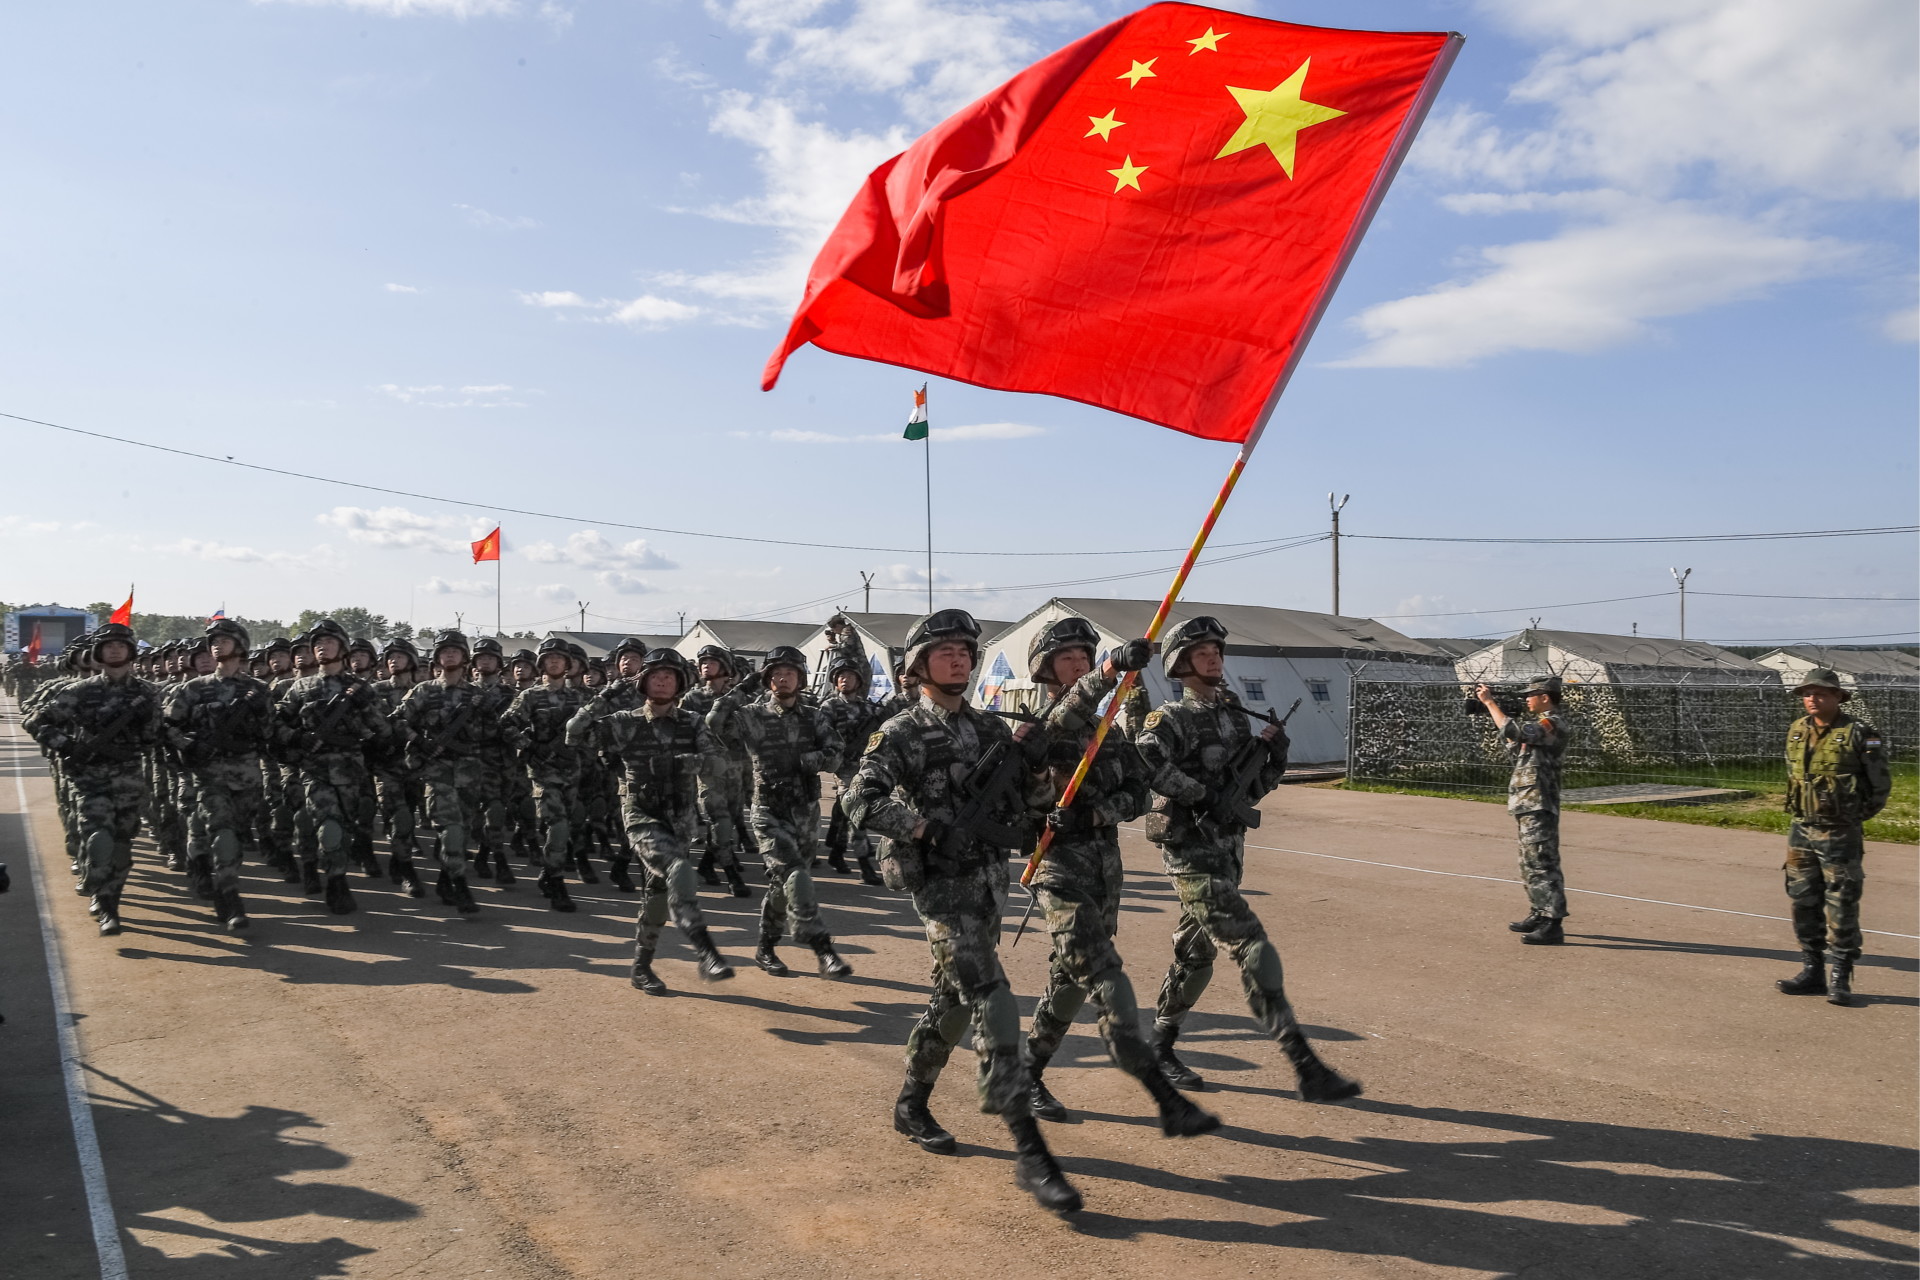 The Evolution of China’s ‘Preventive Counterterrorism’ in Xinjiang